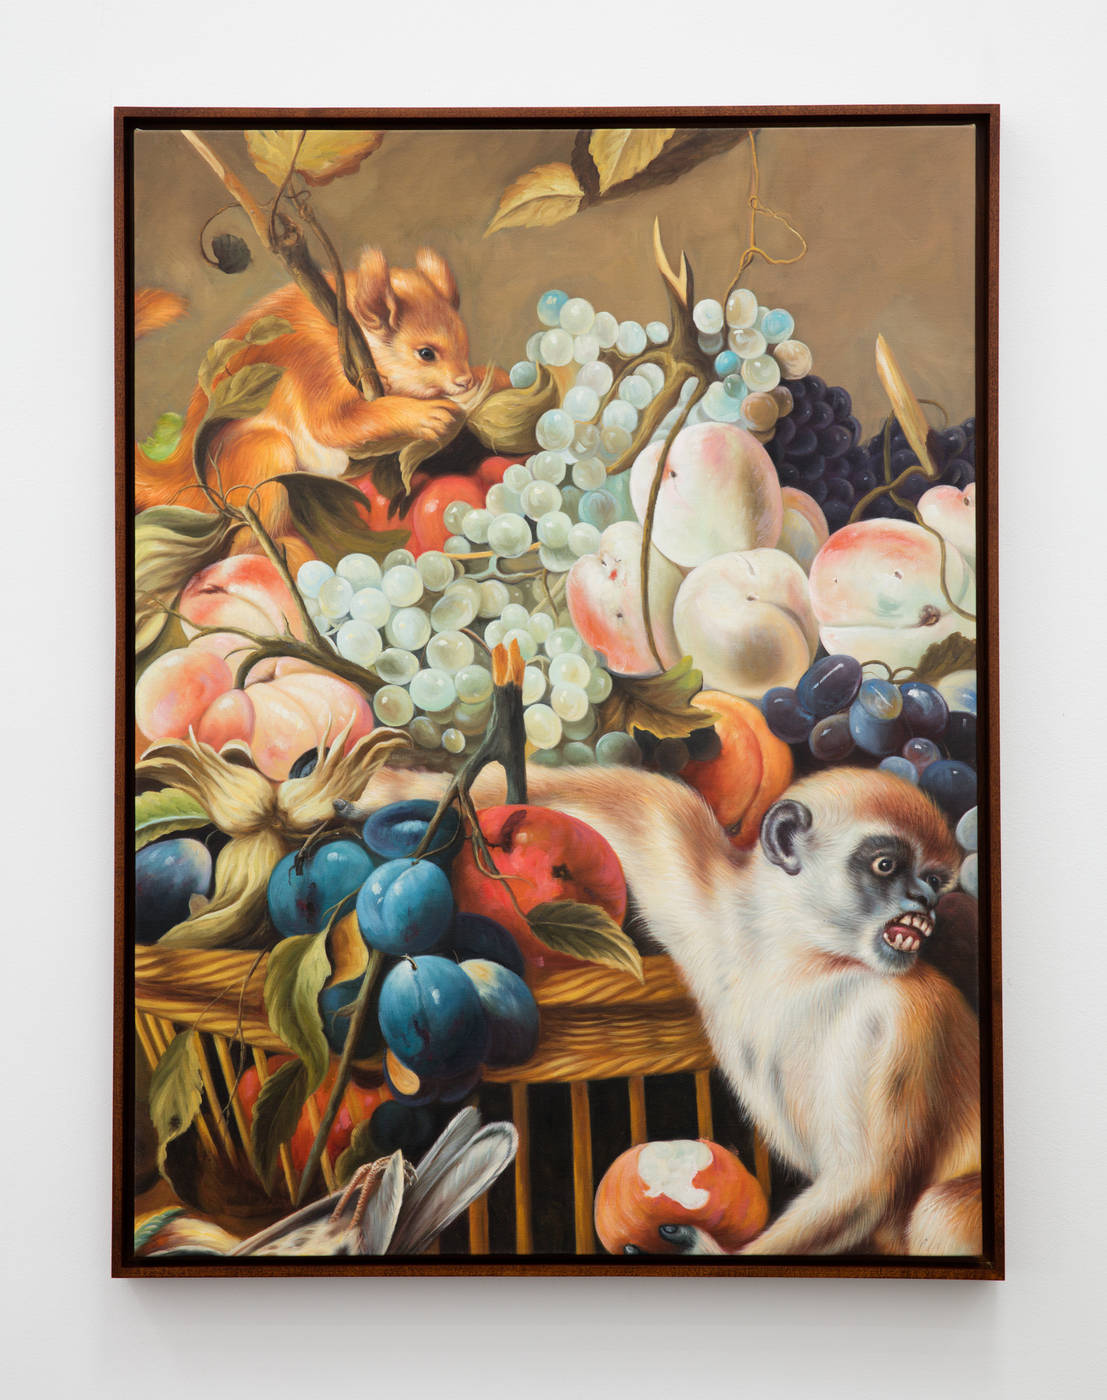 Ethan Cook - Monkey, squirrel and fruit